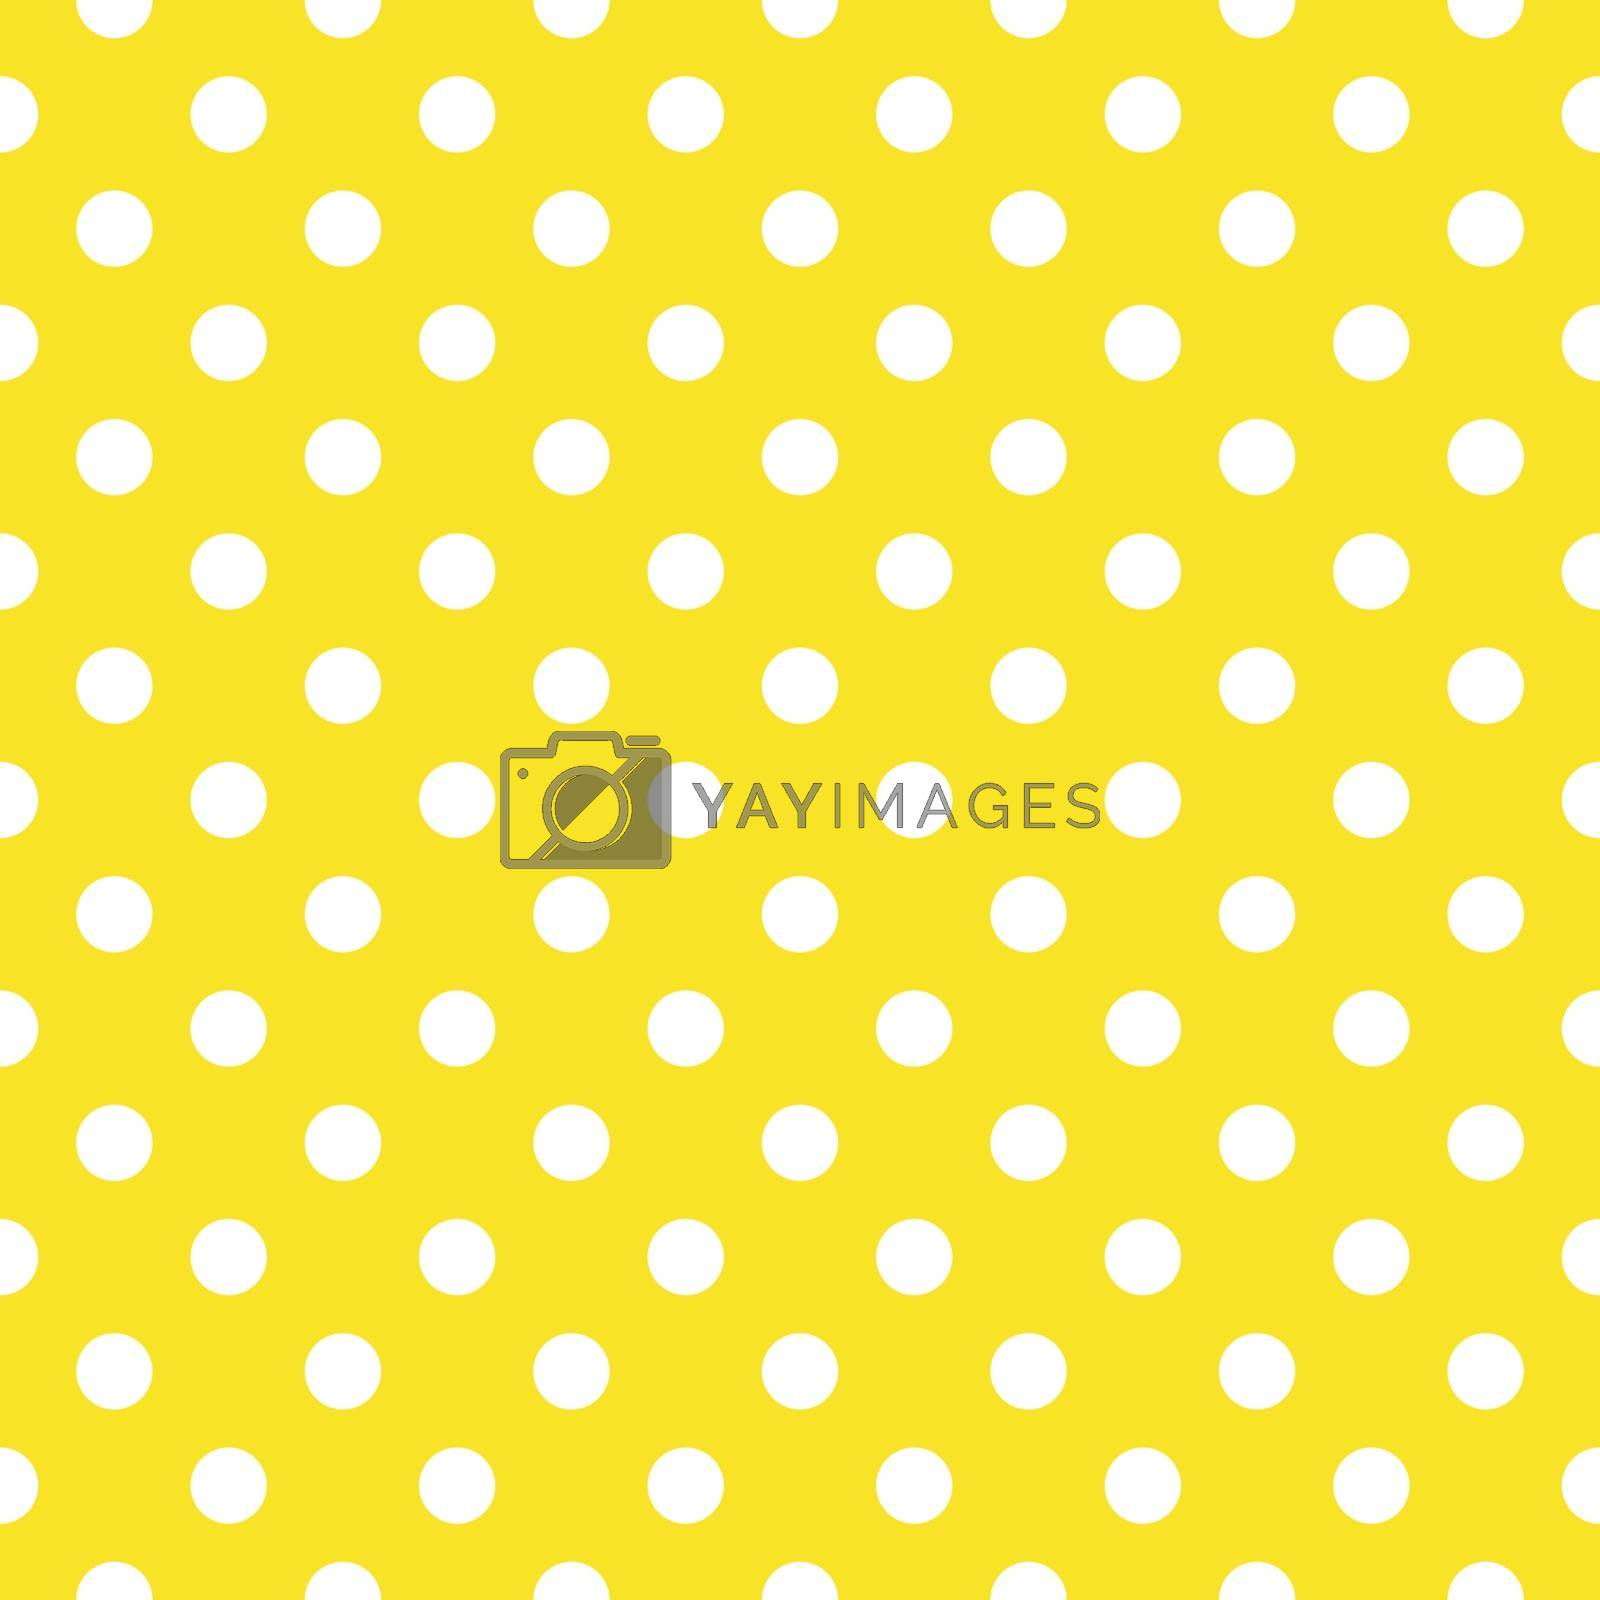 Seamless vector pattern with white polka dots on a lemon yellow background  by ingalinder Vectors & Illustrations with Unlimited Downloads - Yayimages